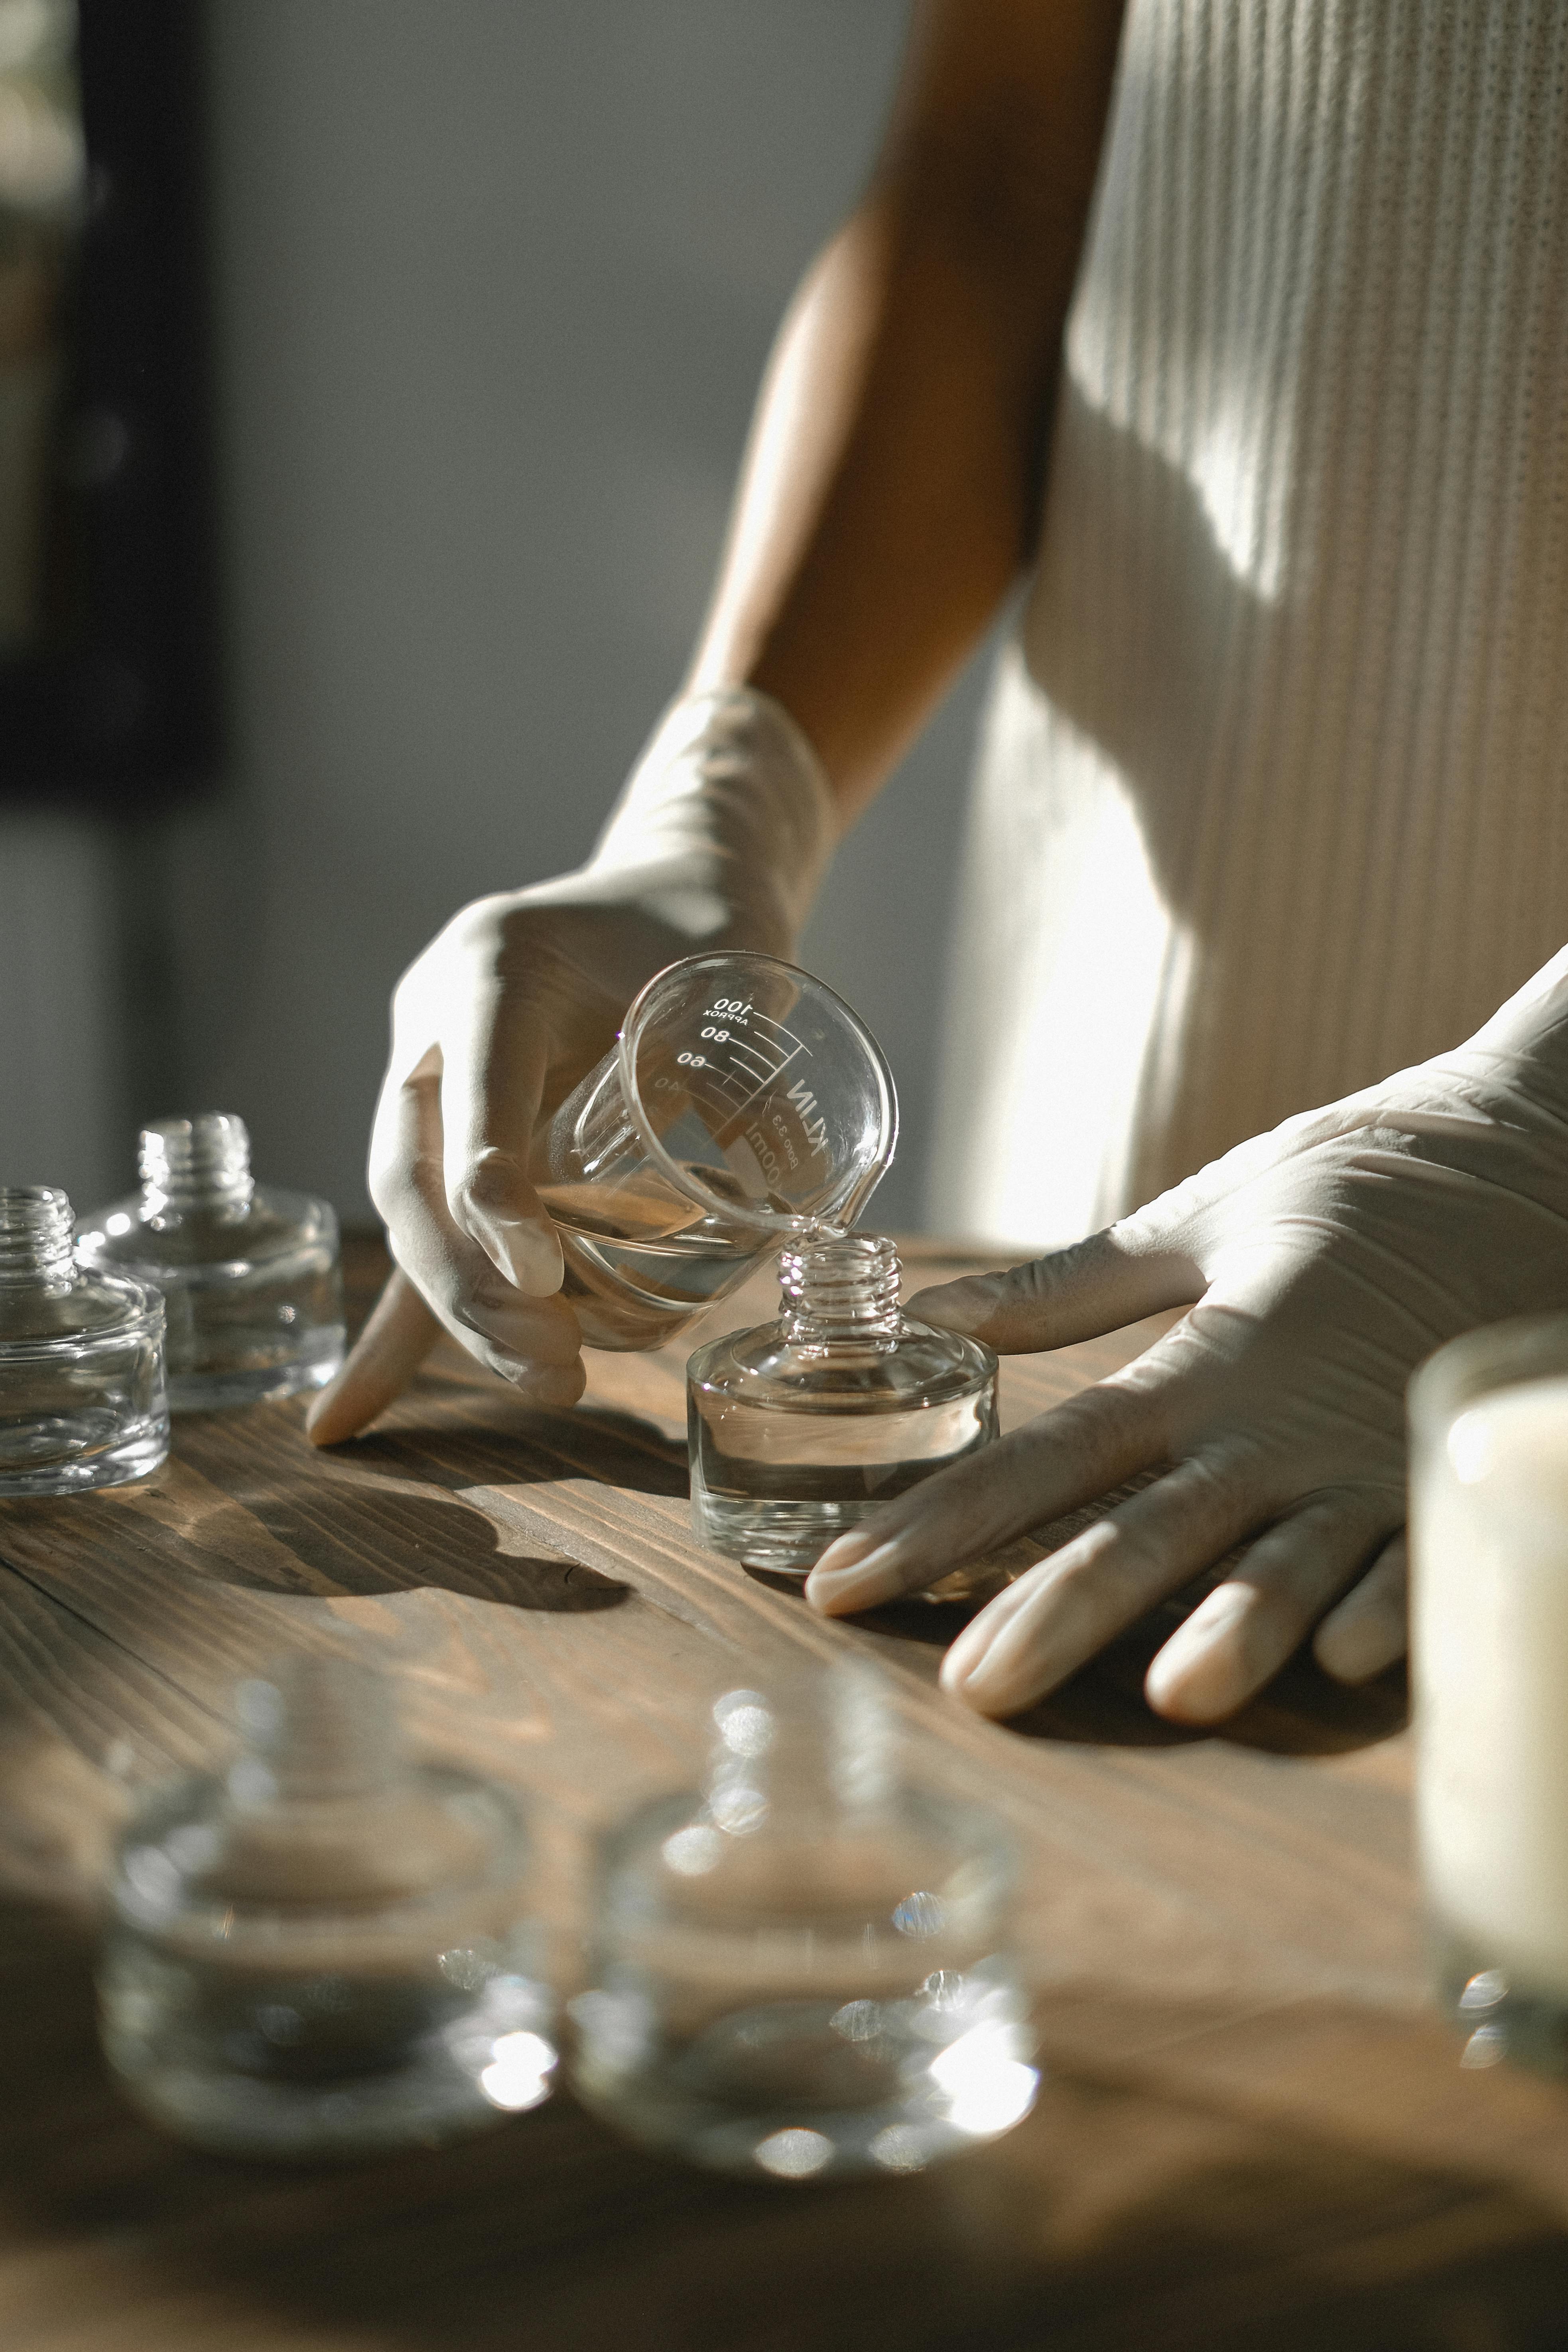 A pair of gloved hands pouring a solution to a bottle of perfume | Source: Pexels